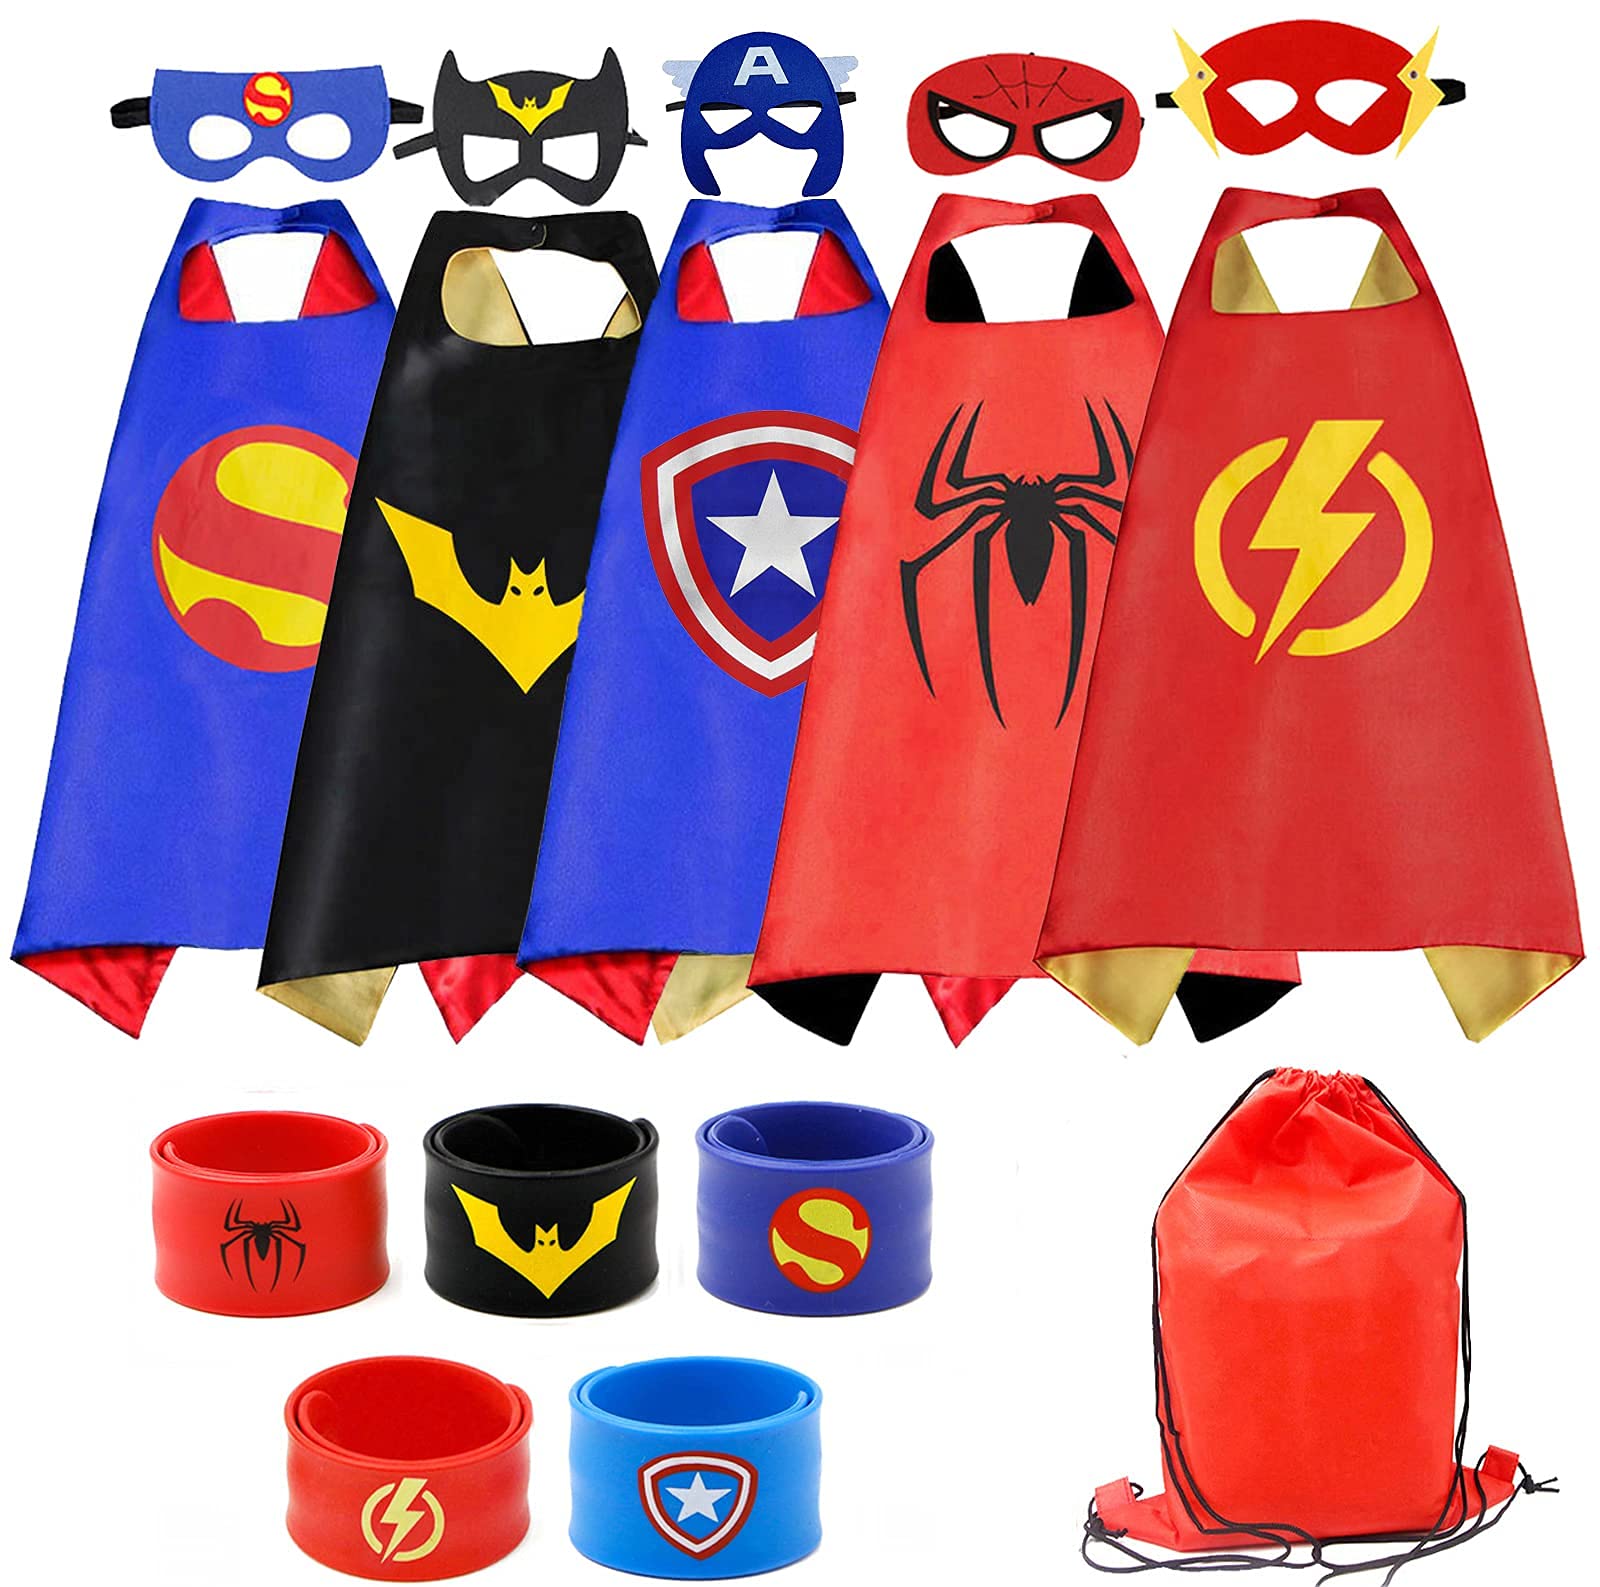 RioRand Kids Dress Up 5PCS Superhero Capes Set and Slap Bracelets for Boys Costumes Birthday Party Gifts